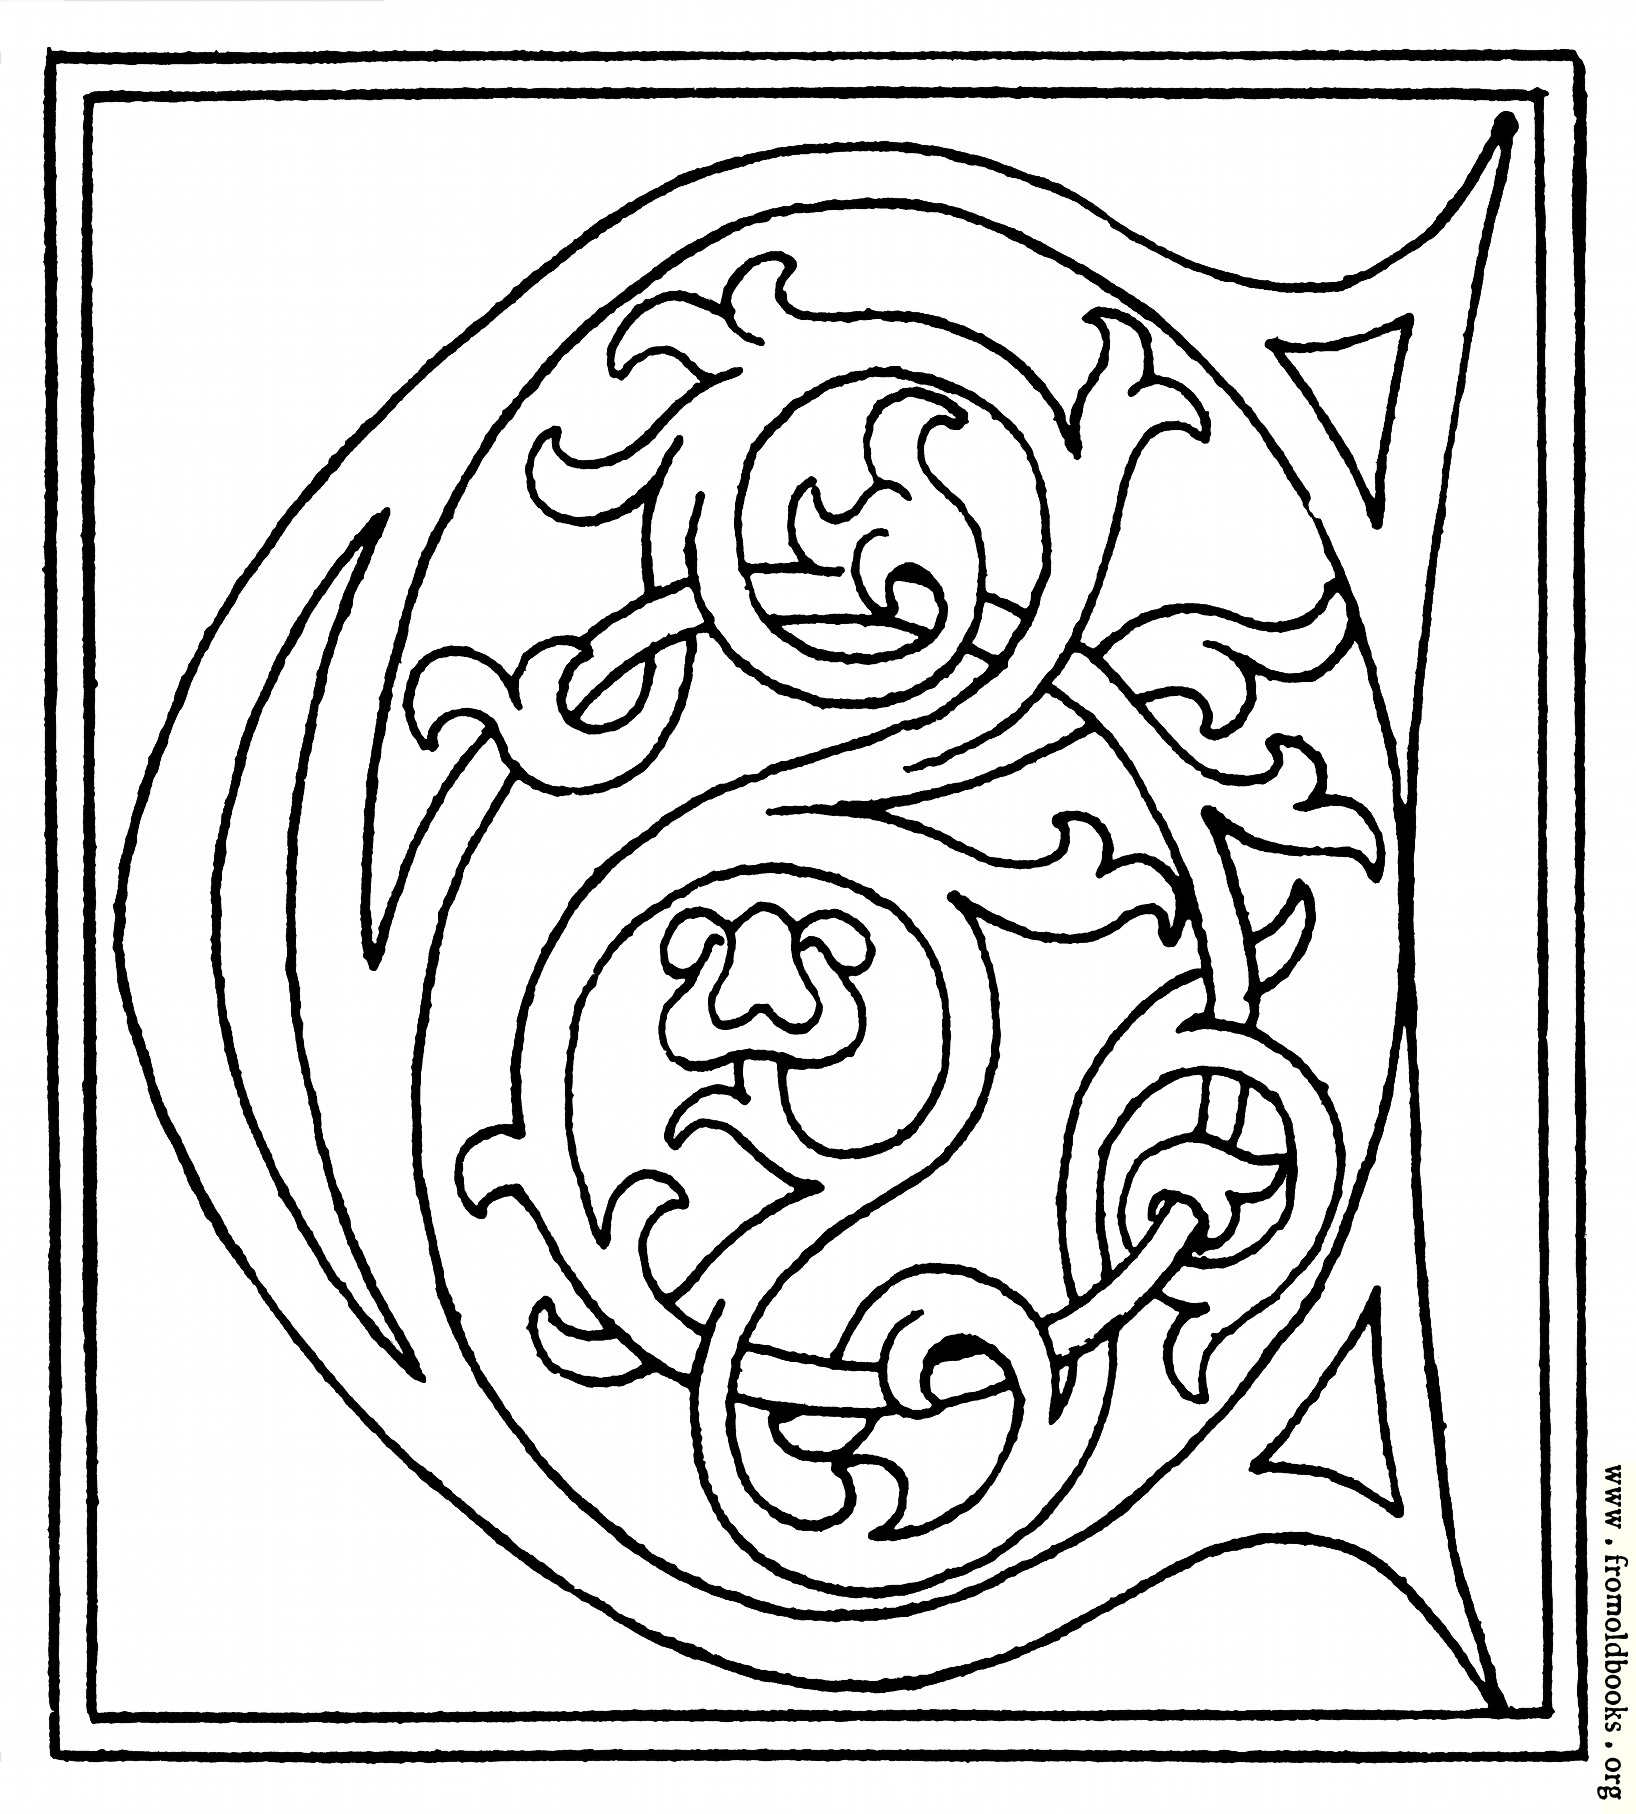 [Picture: clipart: initial letter C from late 15th century printed book]